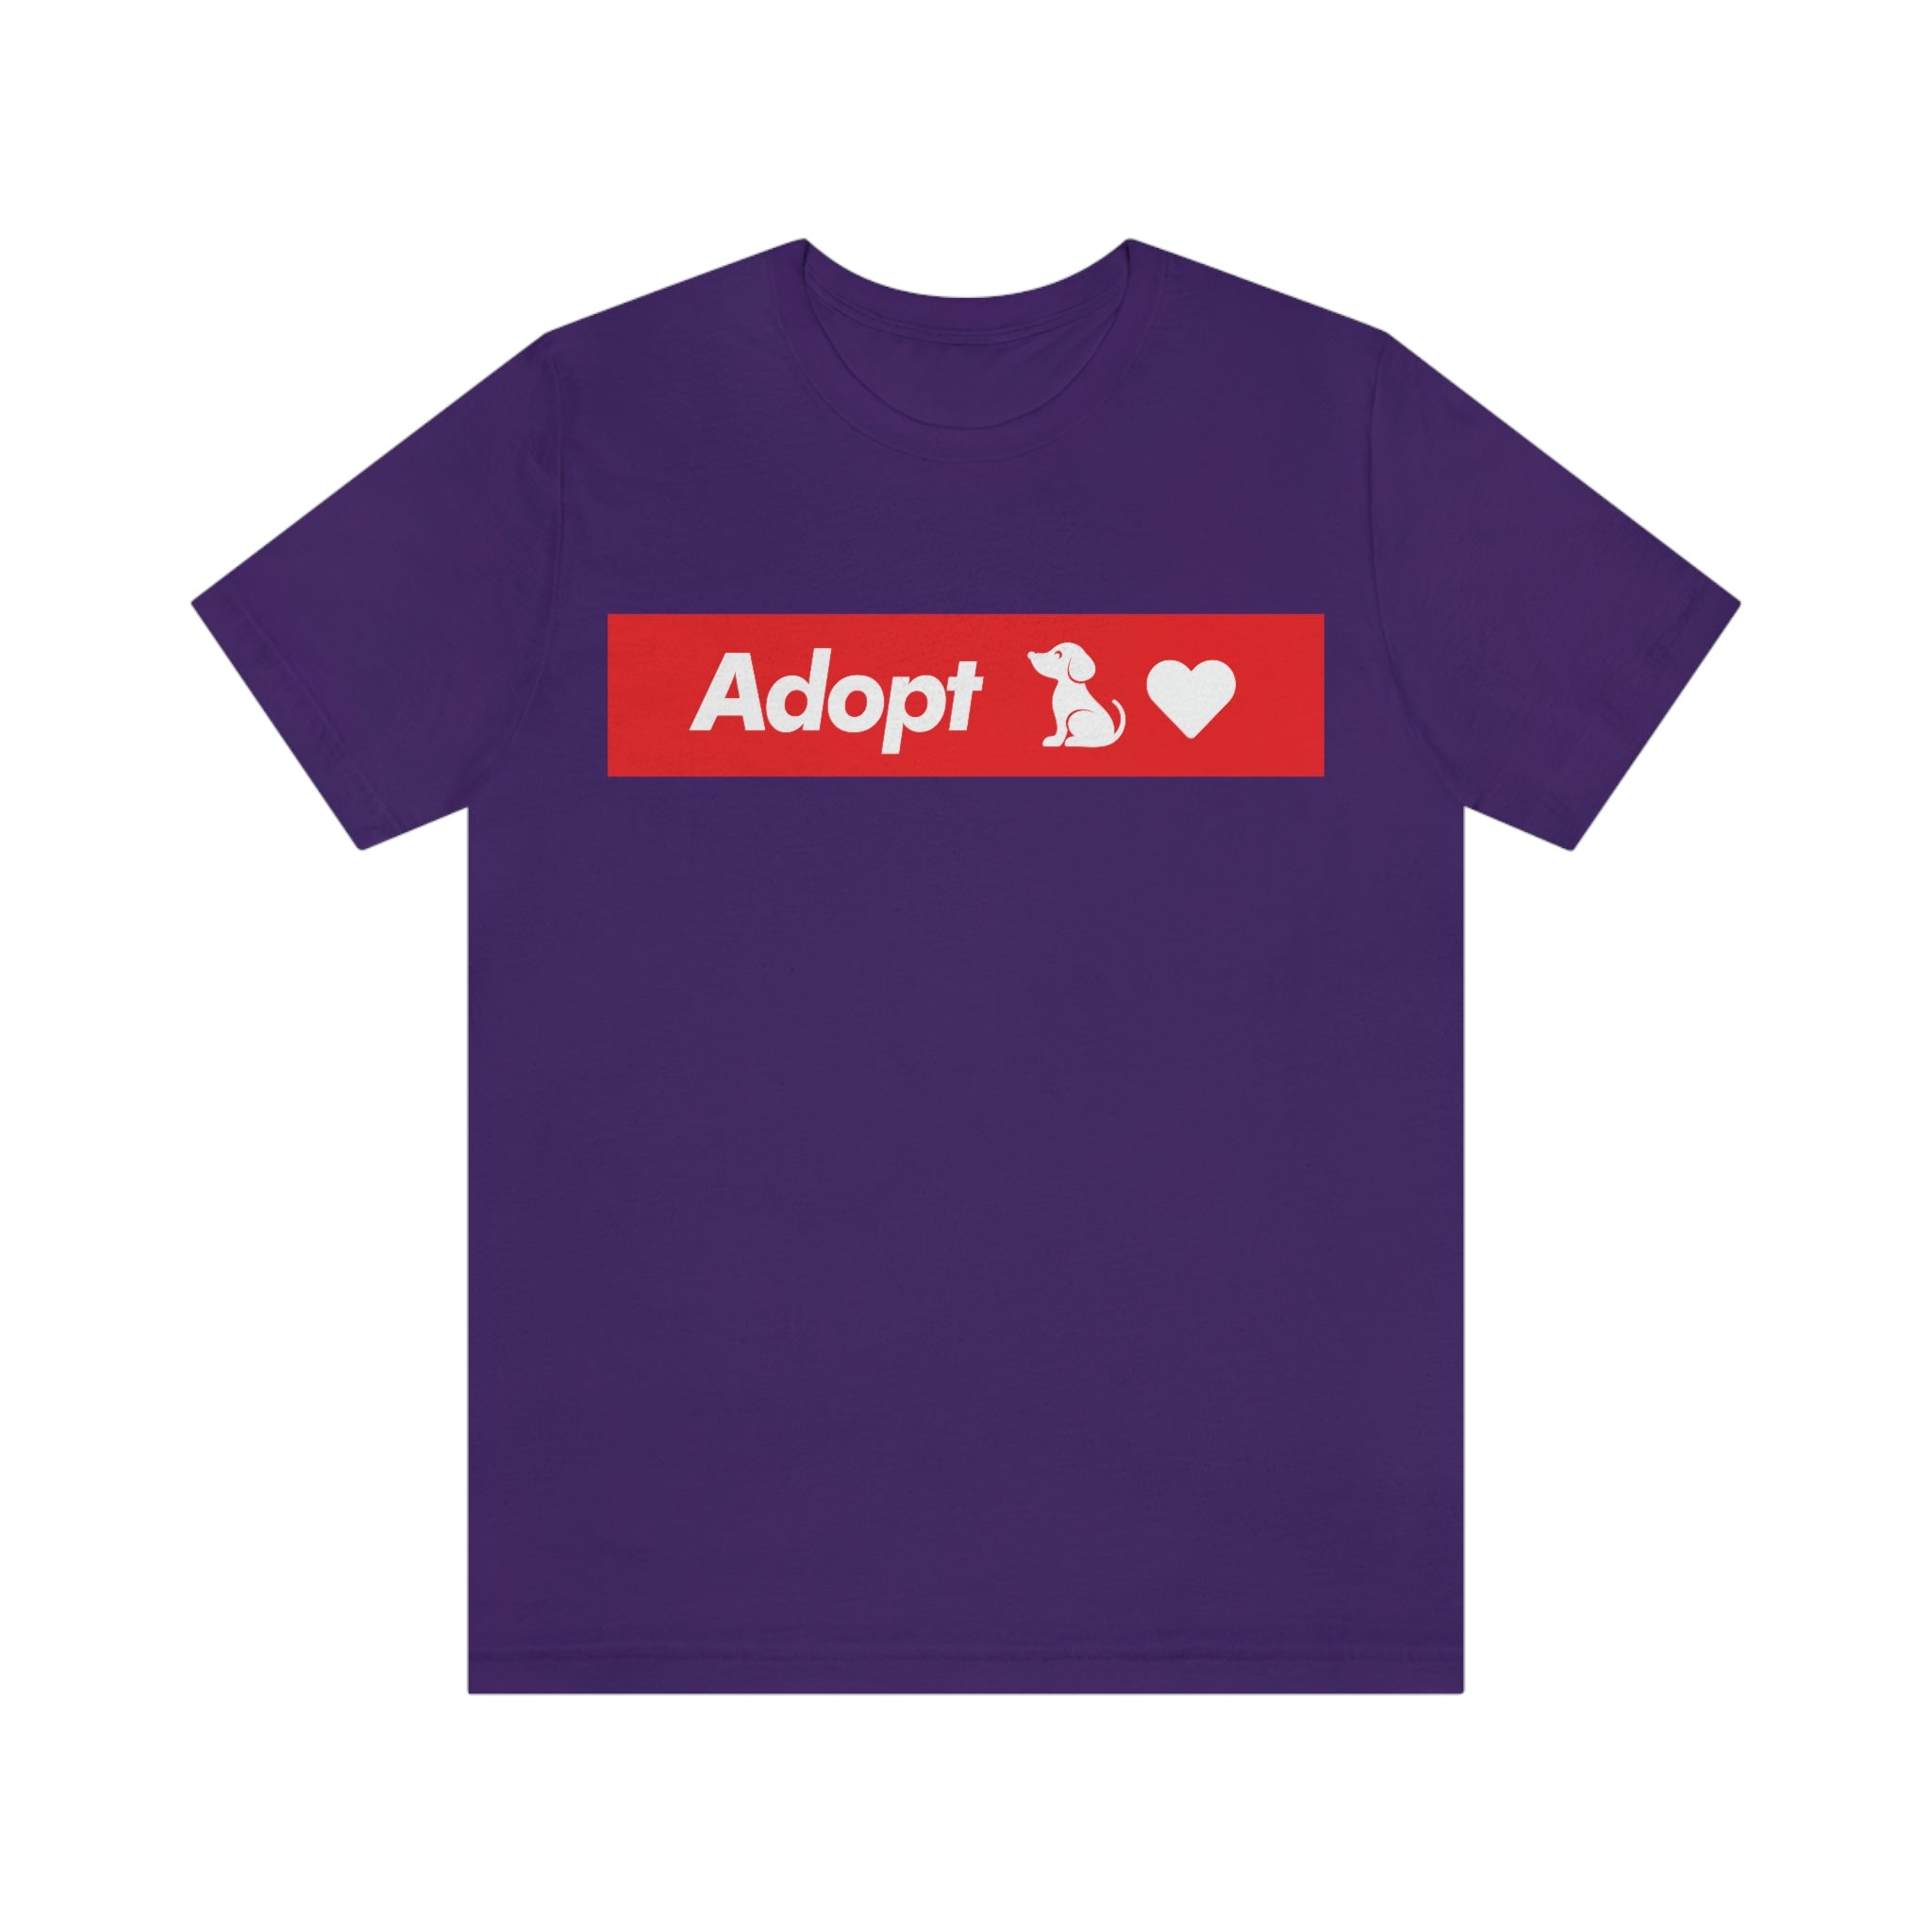 Adopt Love Rescue Dog - RED BANNER : Unisex 100% Comfy Cotton T-Shirt, Supporting Humane Animal Shelters